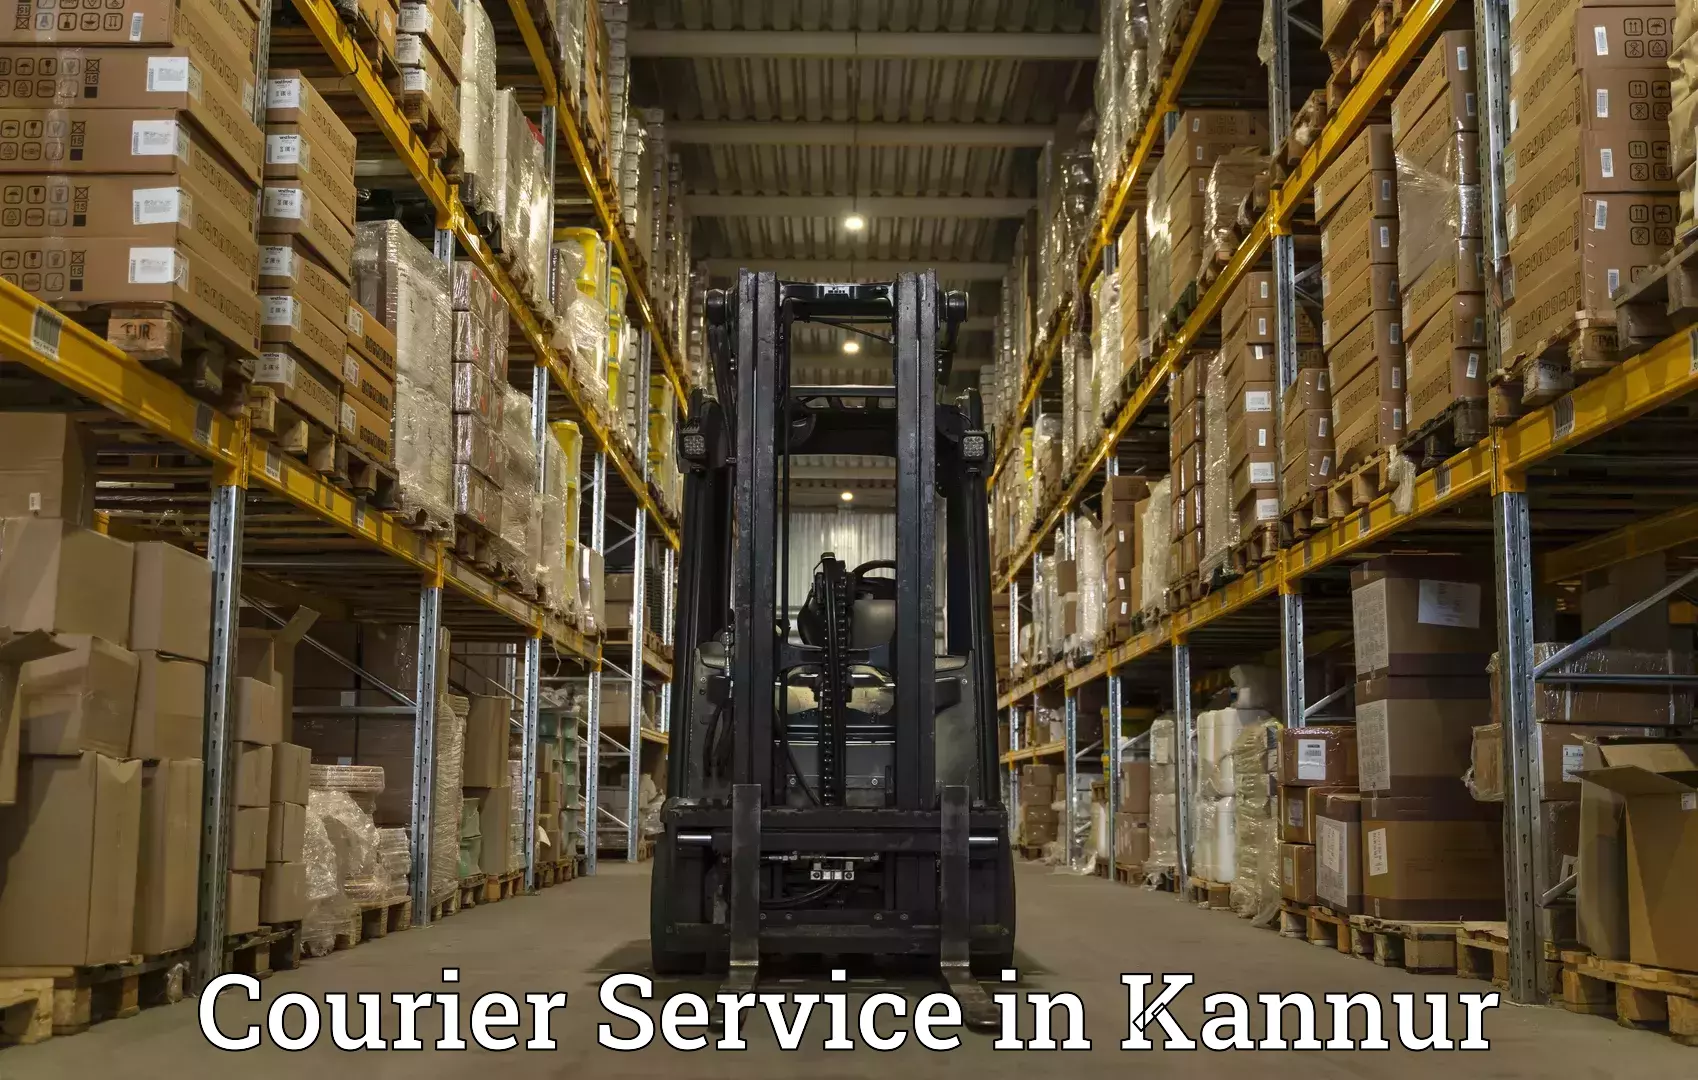 Courier service innovation in Kannur